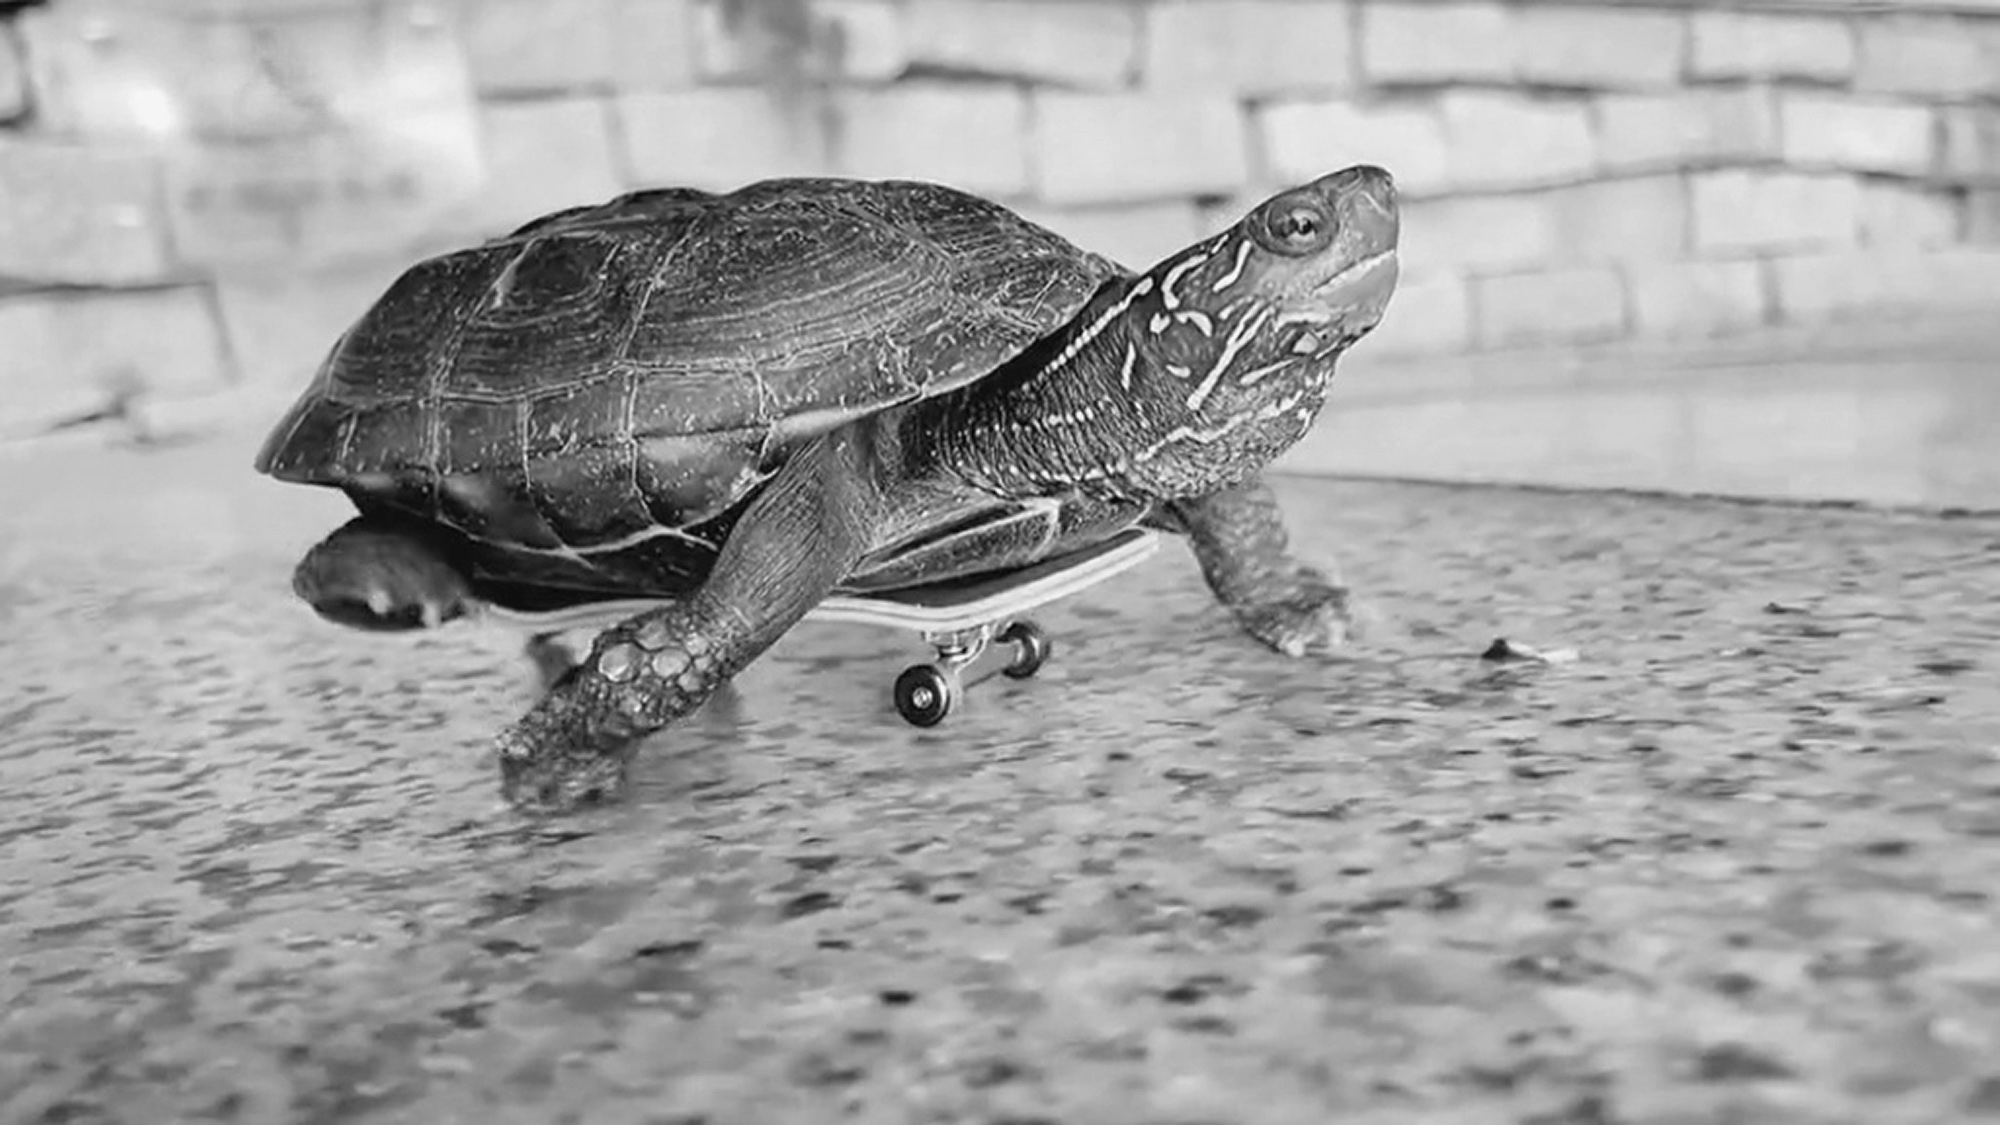 Read more about the article Not So Slow Turtles Whizz Around On Special Little Skateboards